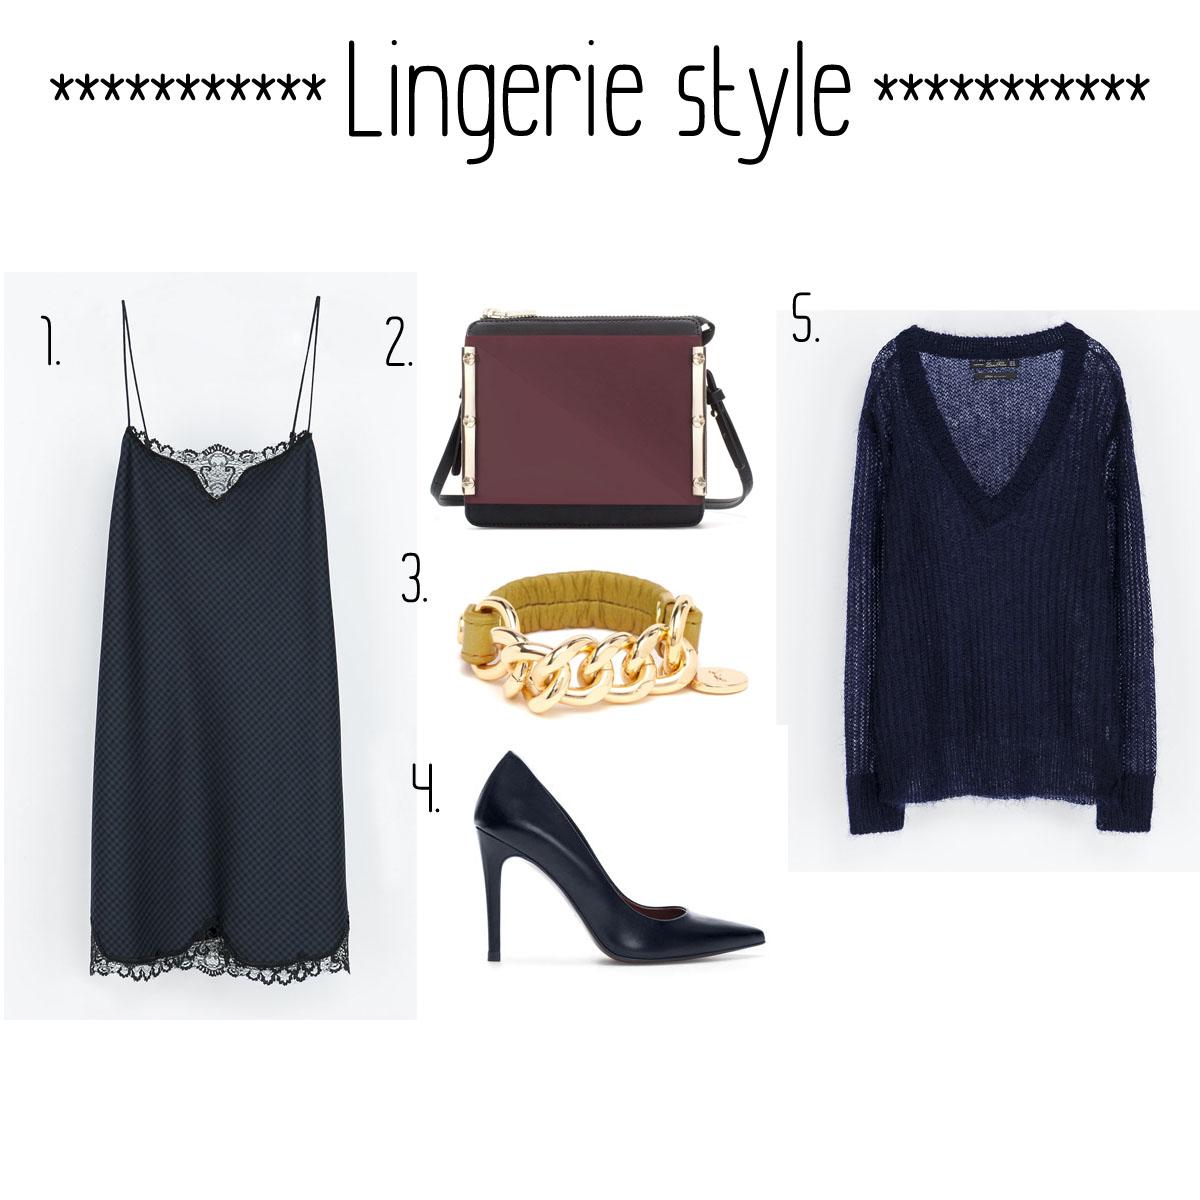 Look1 - Lingerie style